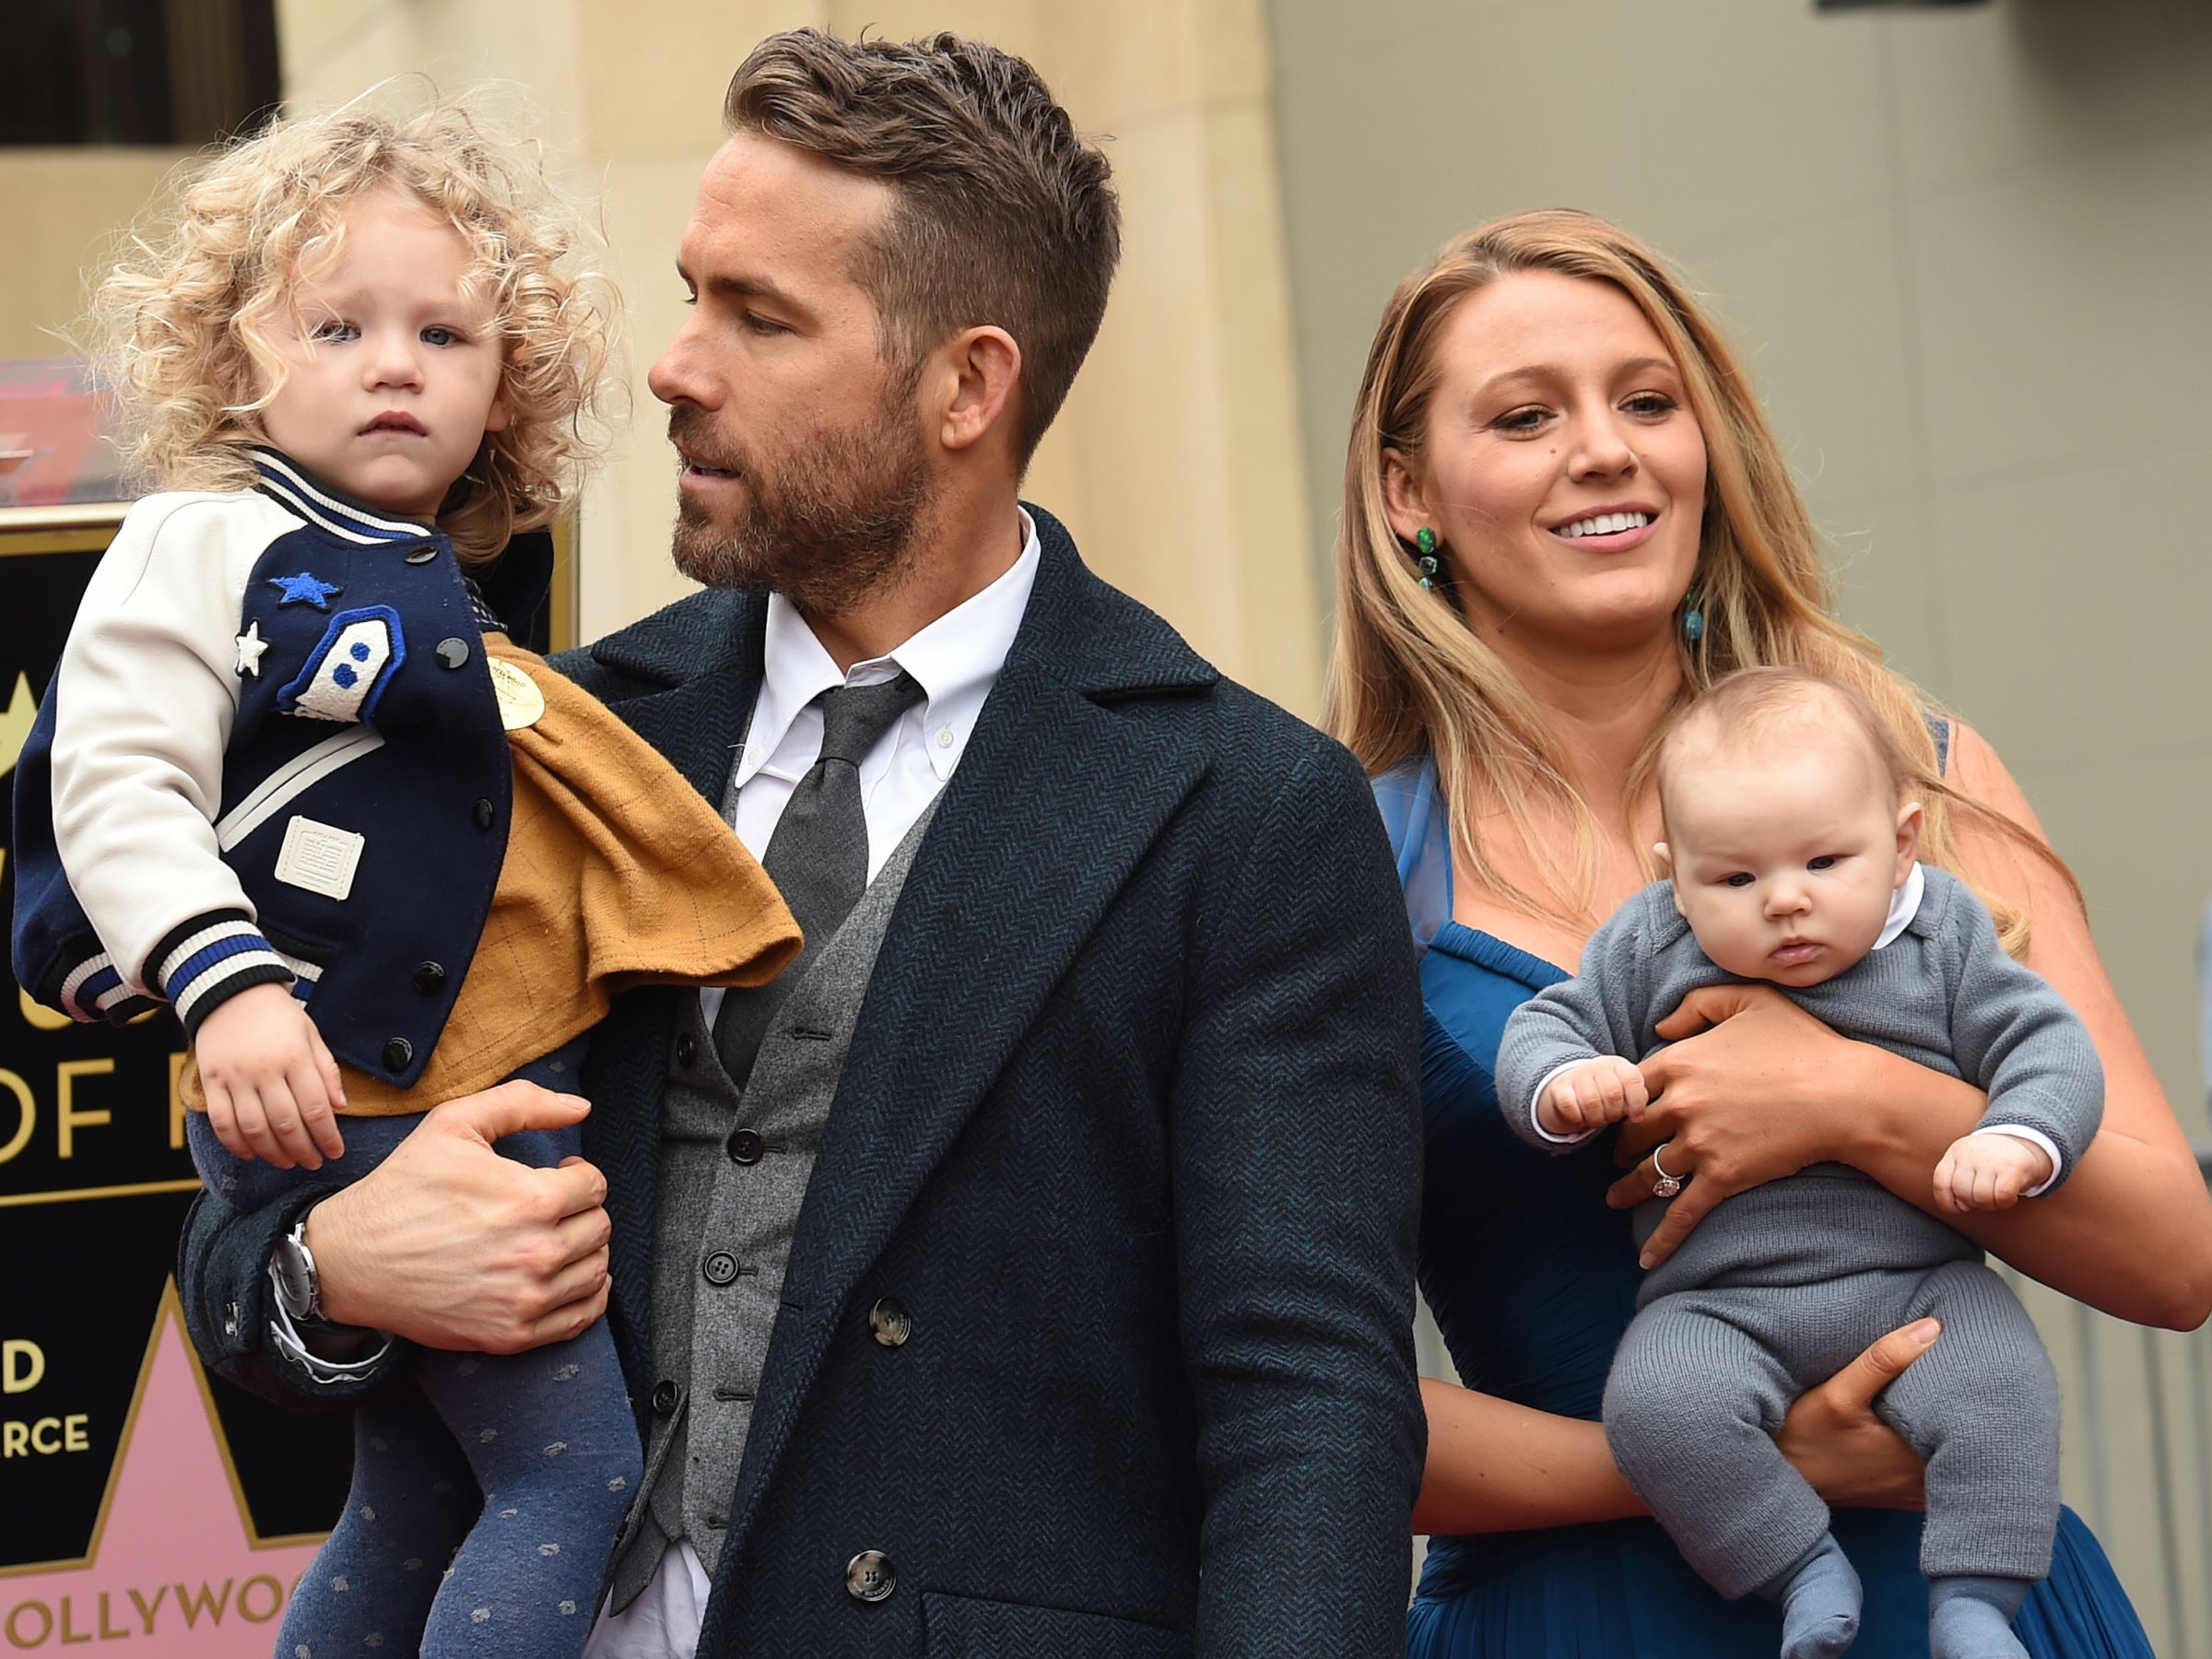 Blake Lively wearing a blue dress holding Inez and Ryan Reynold wearing a black suit holding James